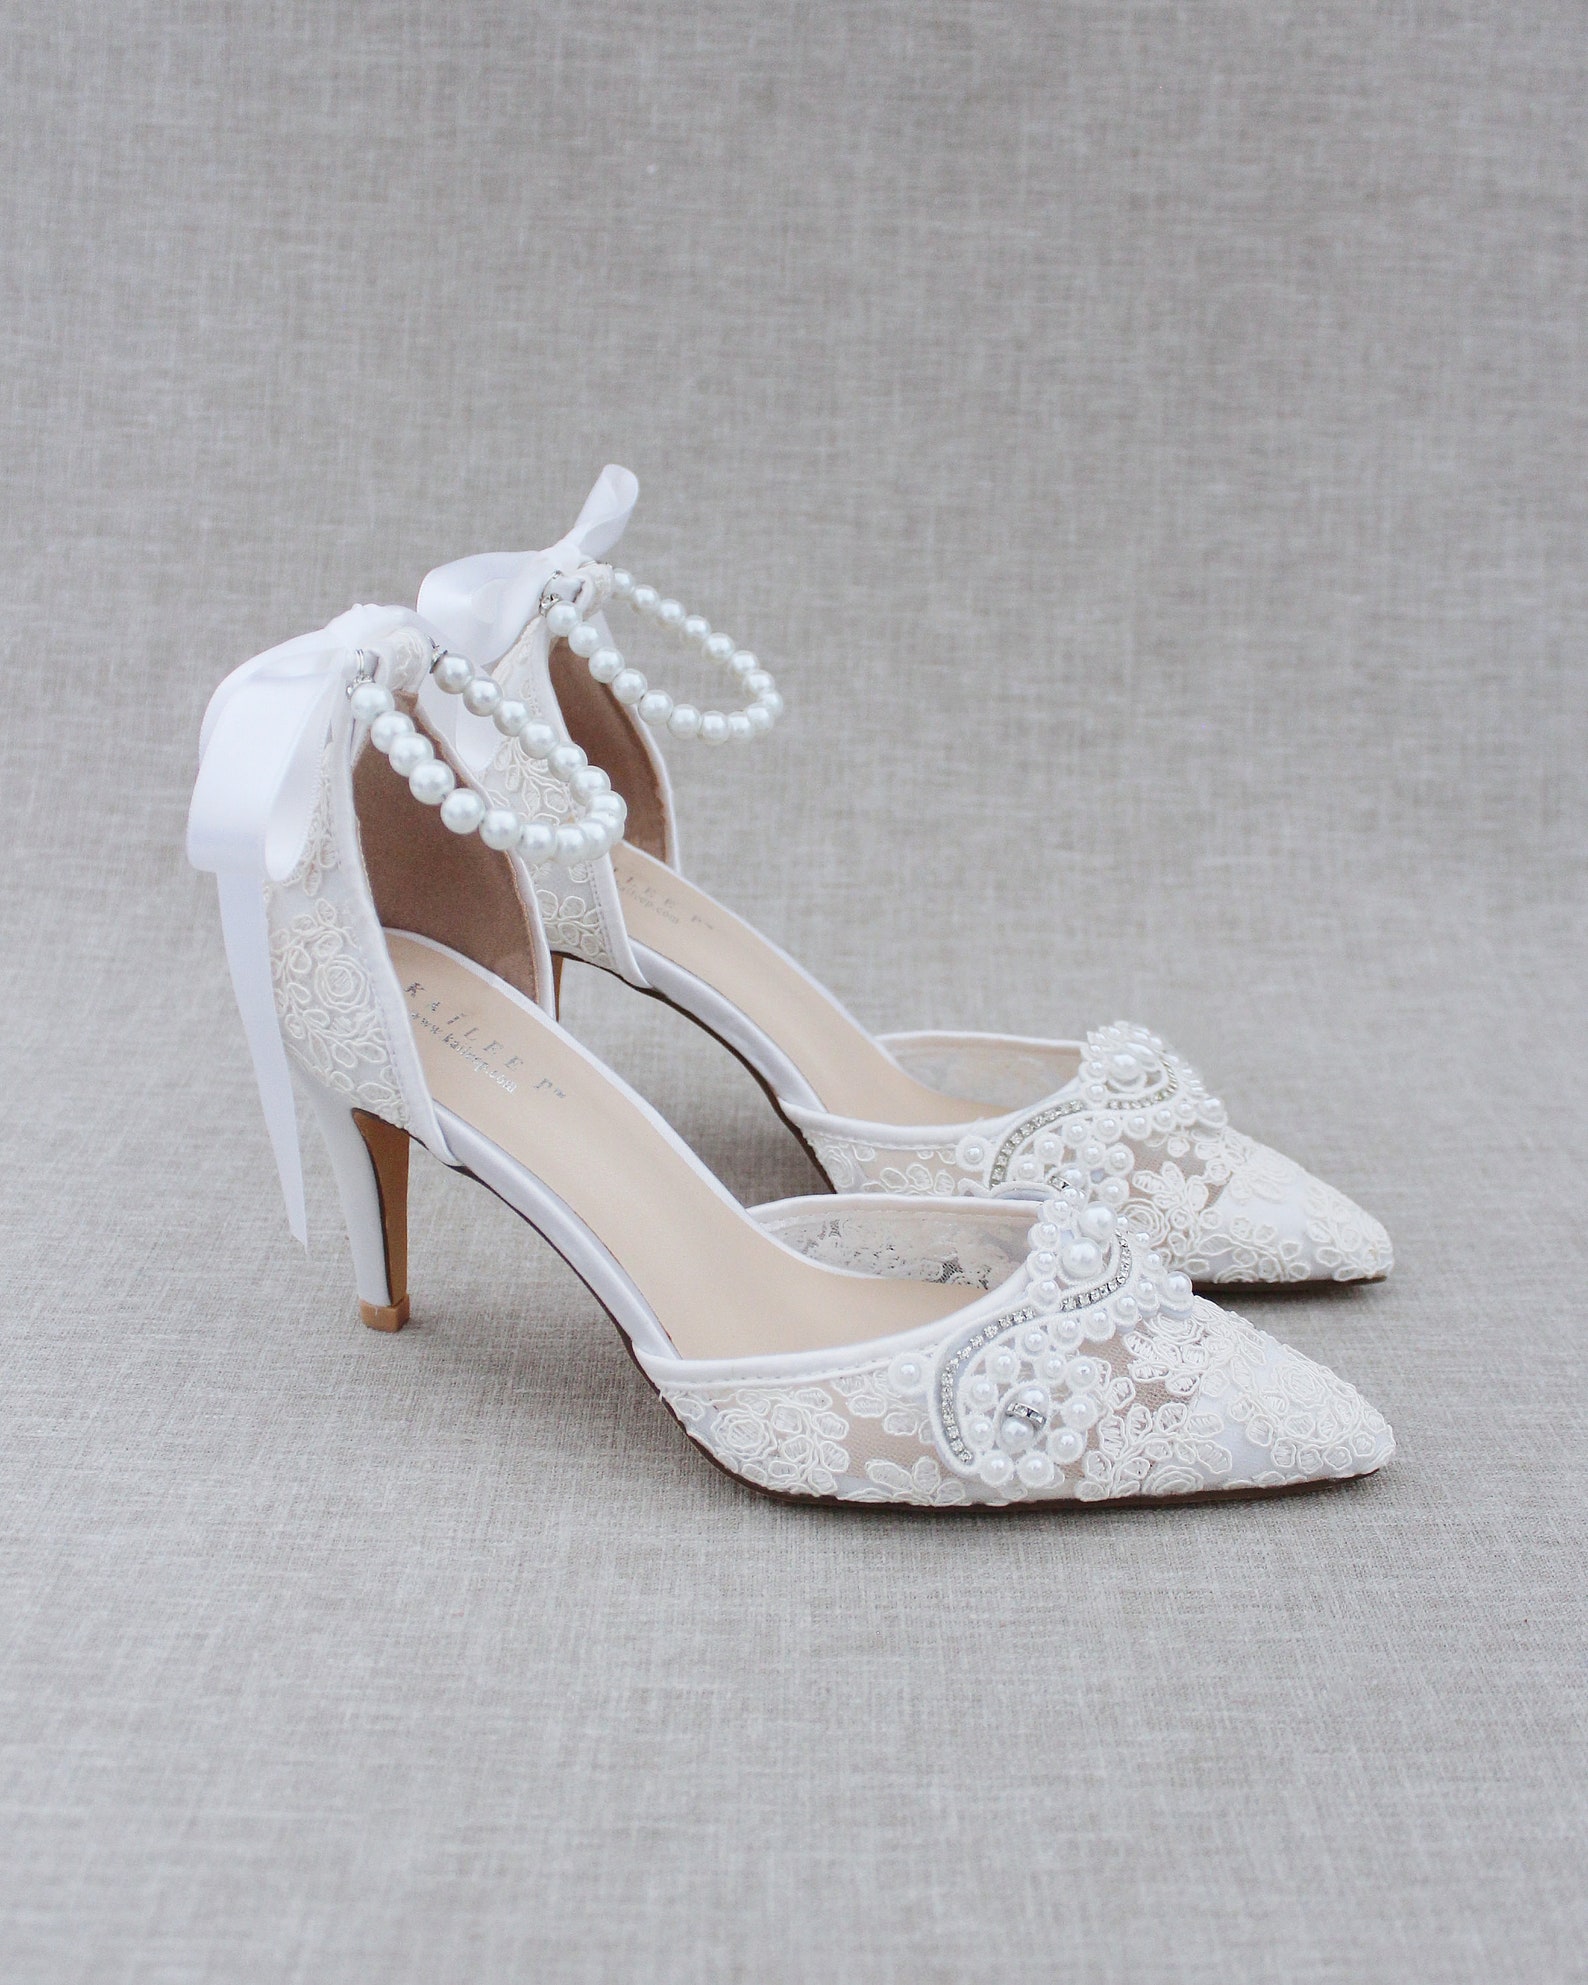 White Crochet Lace Pointy Toe HEELS With Small Pearls - Etsy